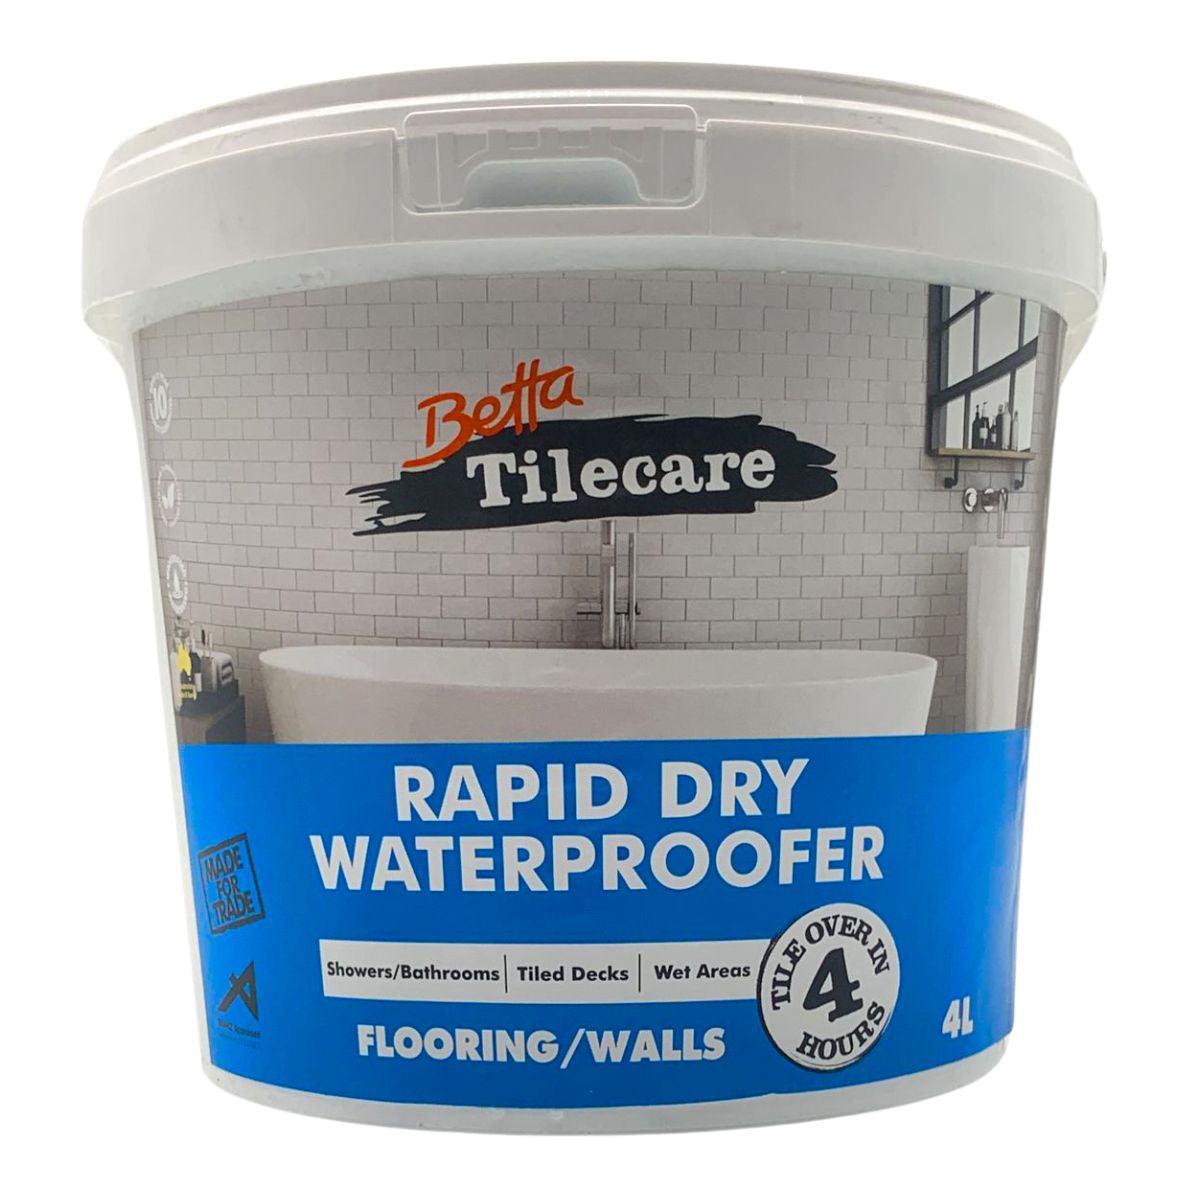 Betta Tilecare Rapid Dry Wet Area Rapid Dry Waterproofer | 4 Litres - South East Clearance Centre